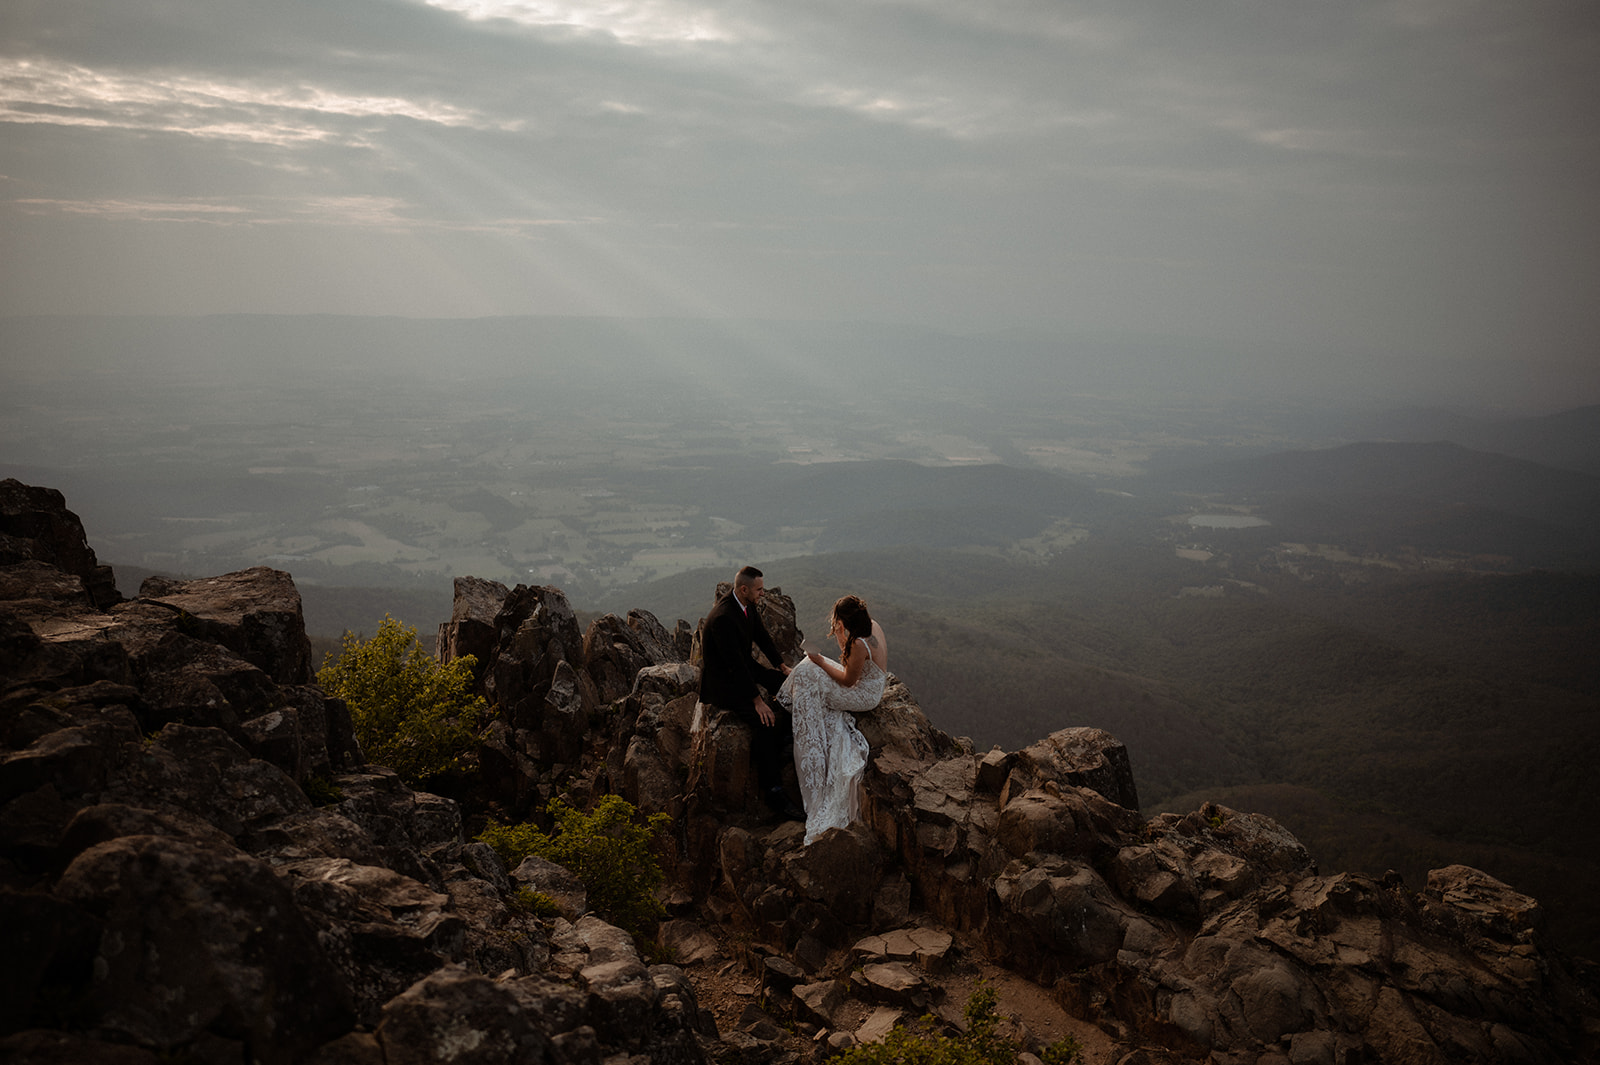 A June sunset hiking elopement on Stony Man Summit in Shenandoah National Park